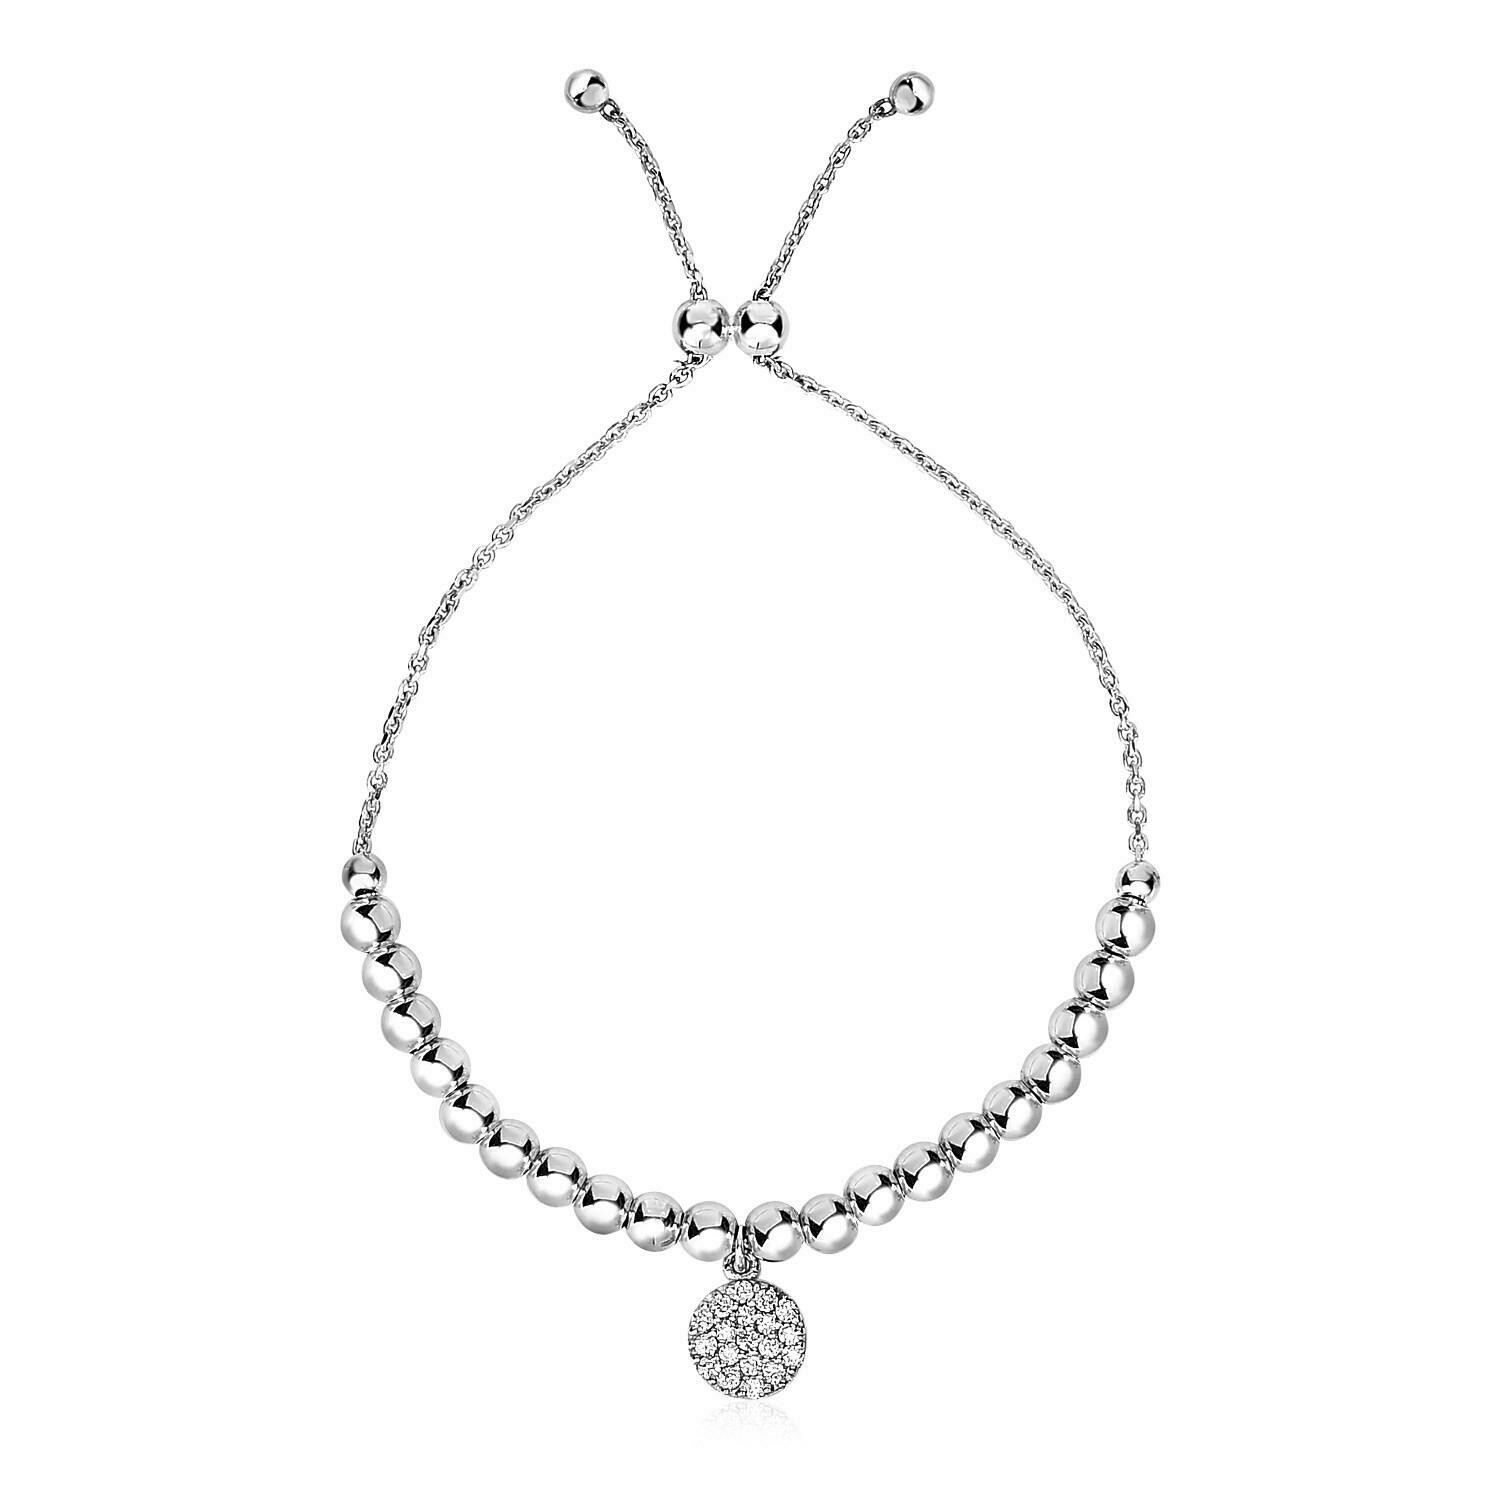 Adjustable Bead Bracelet with Round Charm and Cubic Zirconias in Sterling Silver, Size: 9.25&quot;